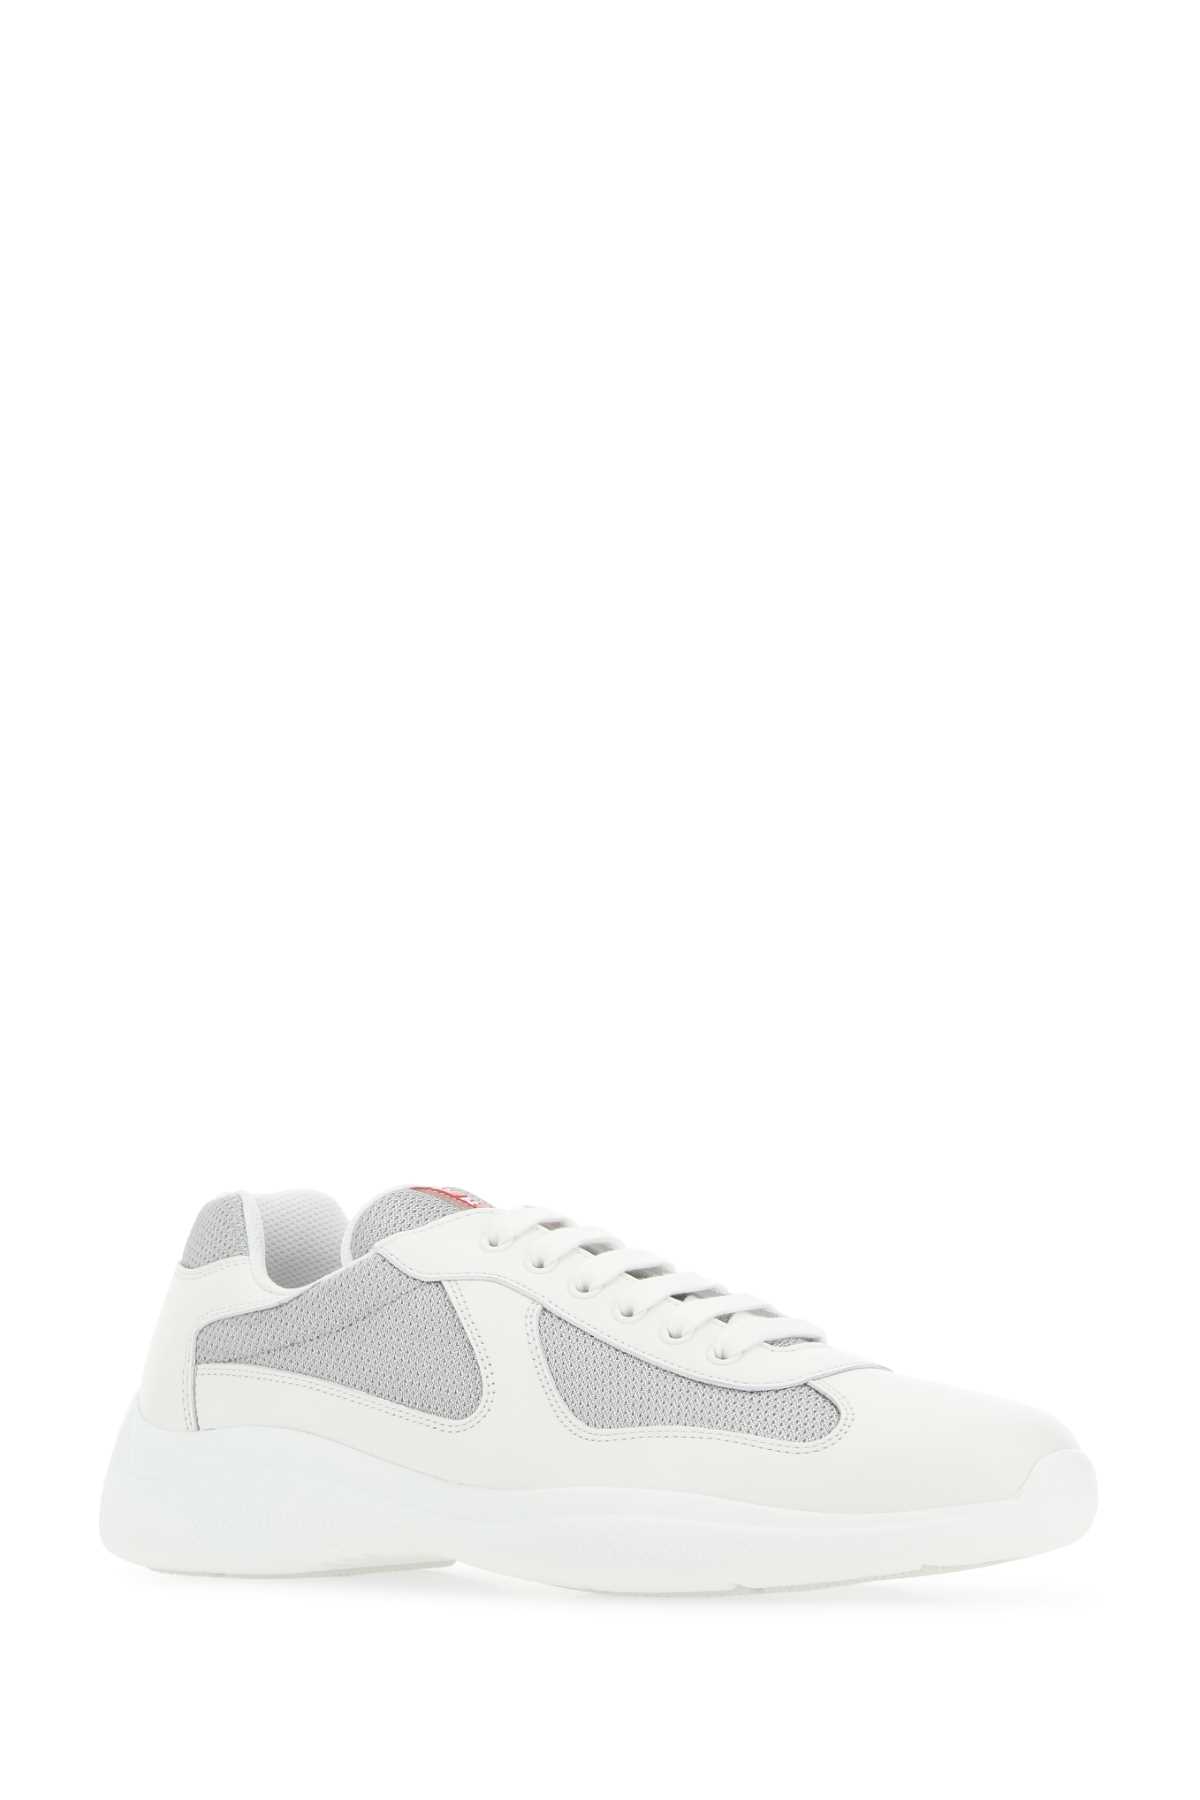 Shop Prada Two-tone Leather And Fabric Sneakers In F0j36